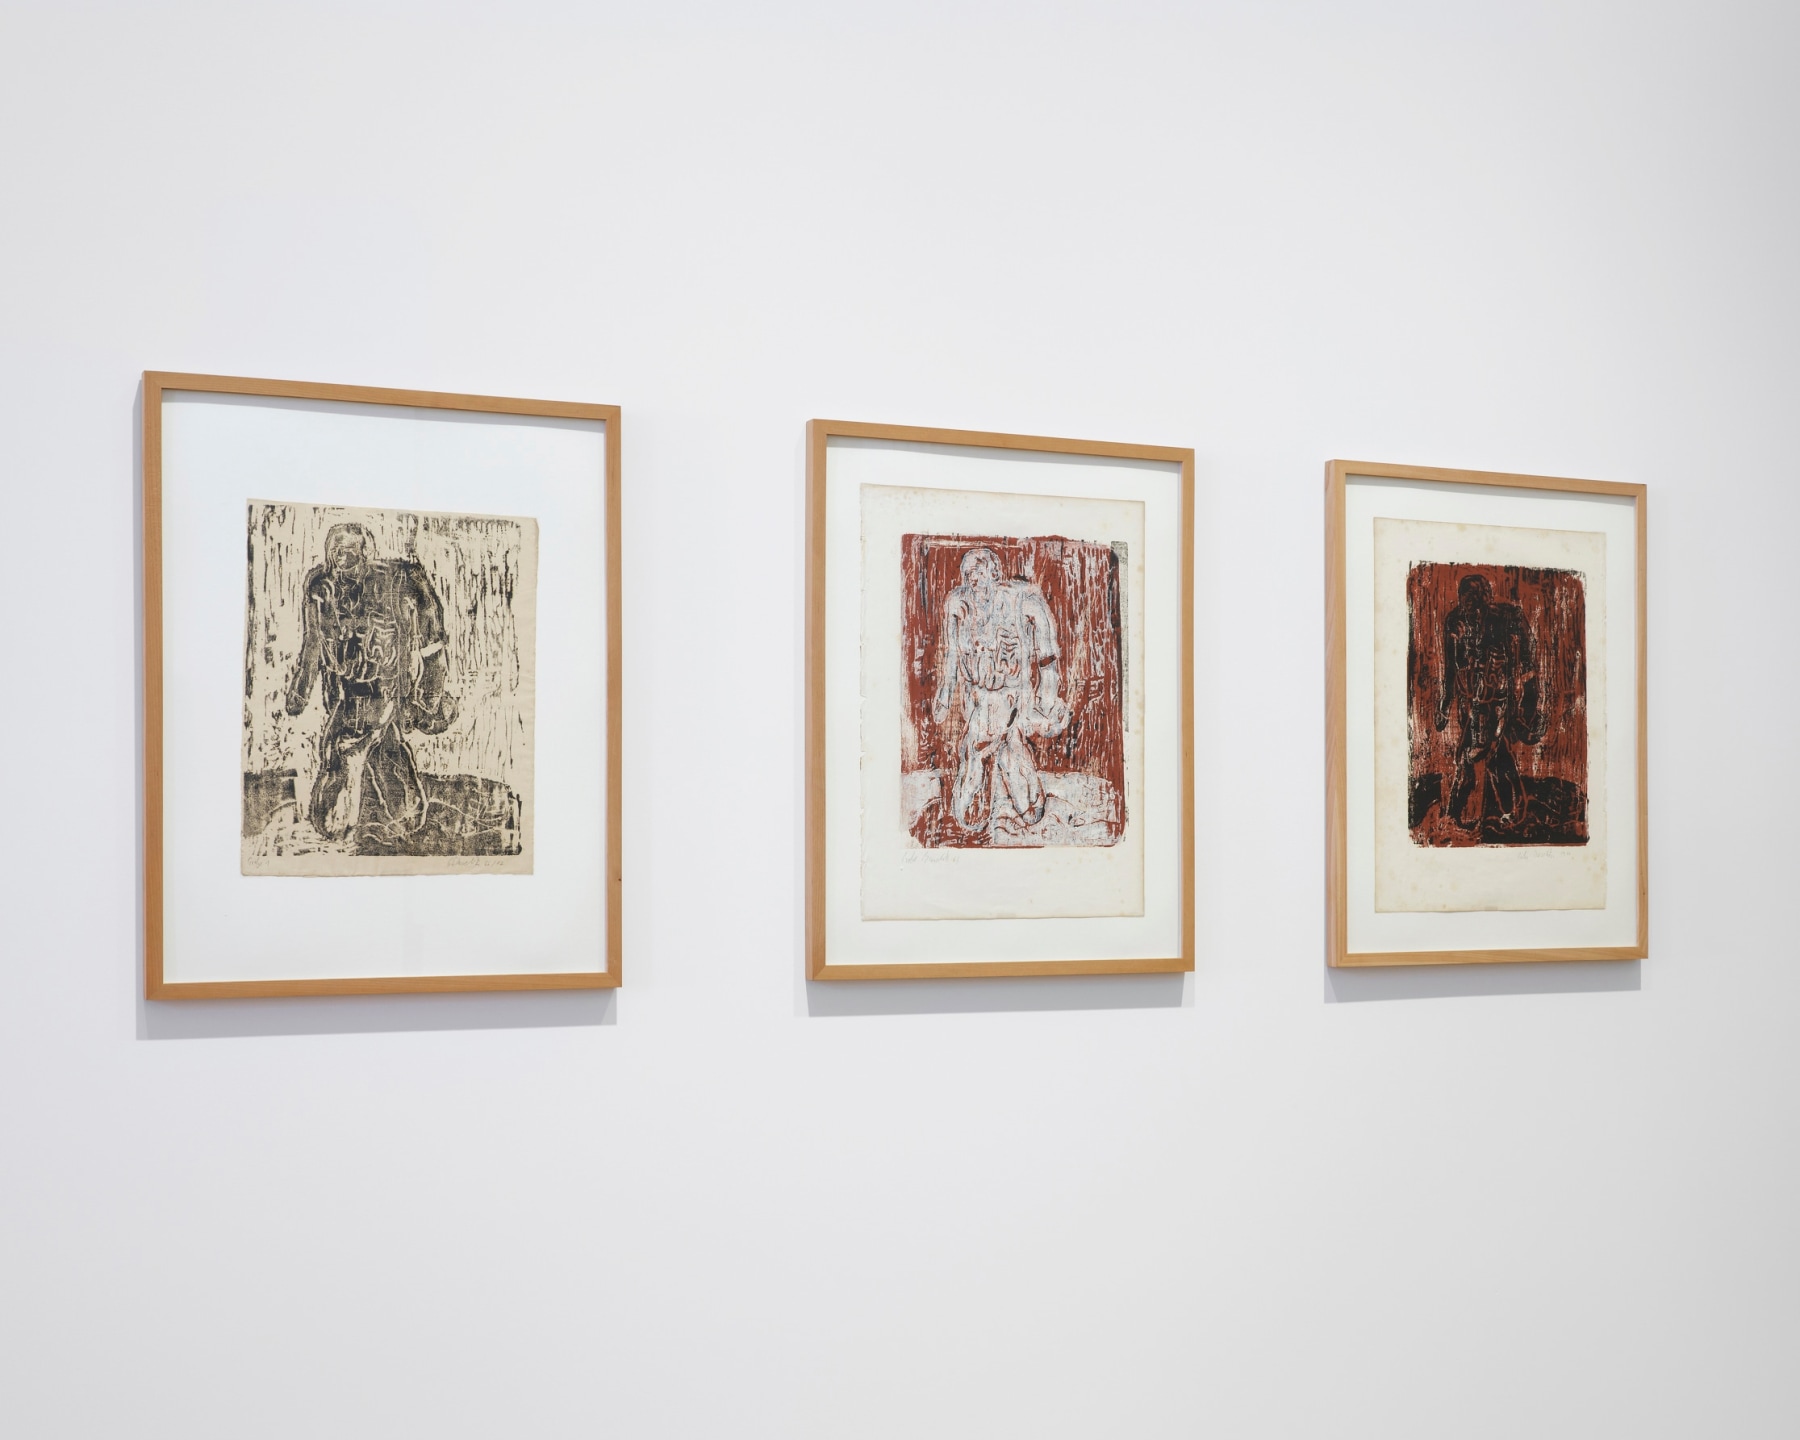 tyran Omkreds fumle Georg Baselitz - Prints from the 1960s - Exhibitions - Luhring Augustine